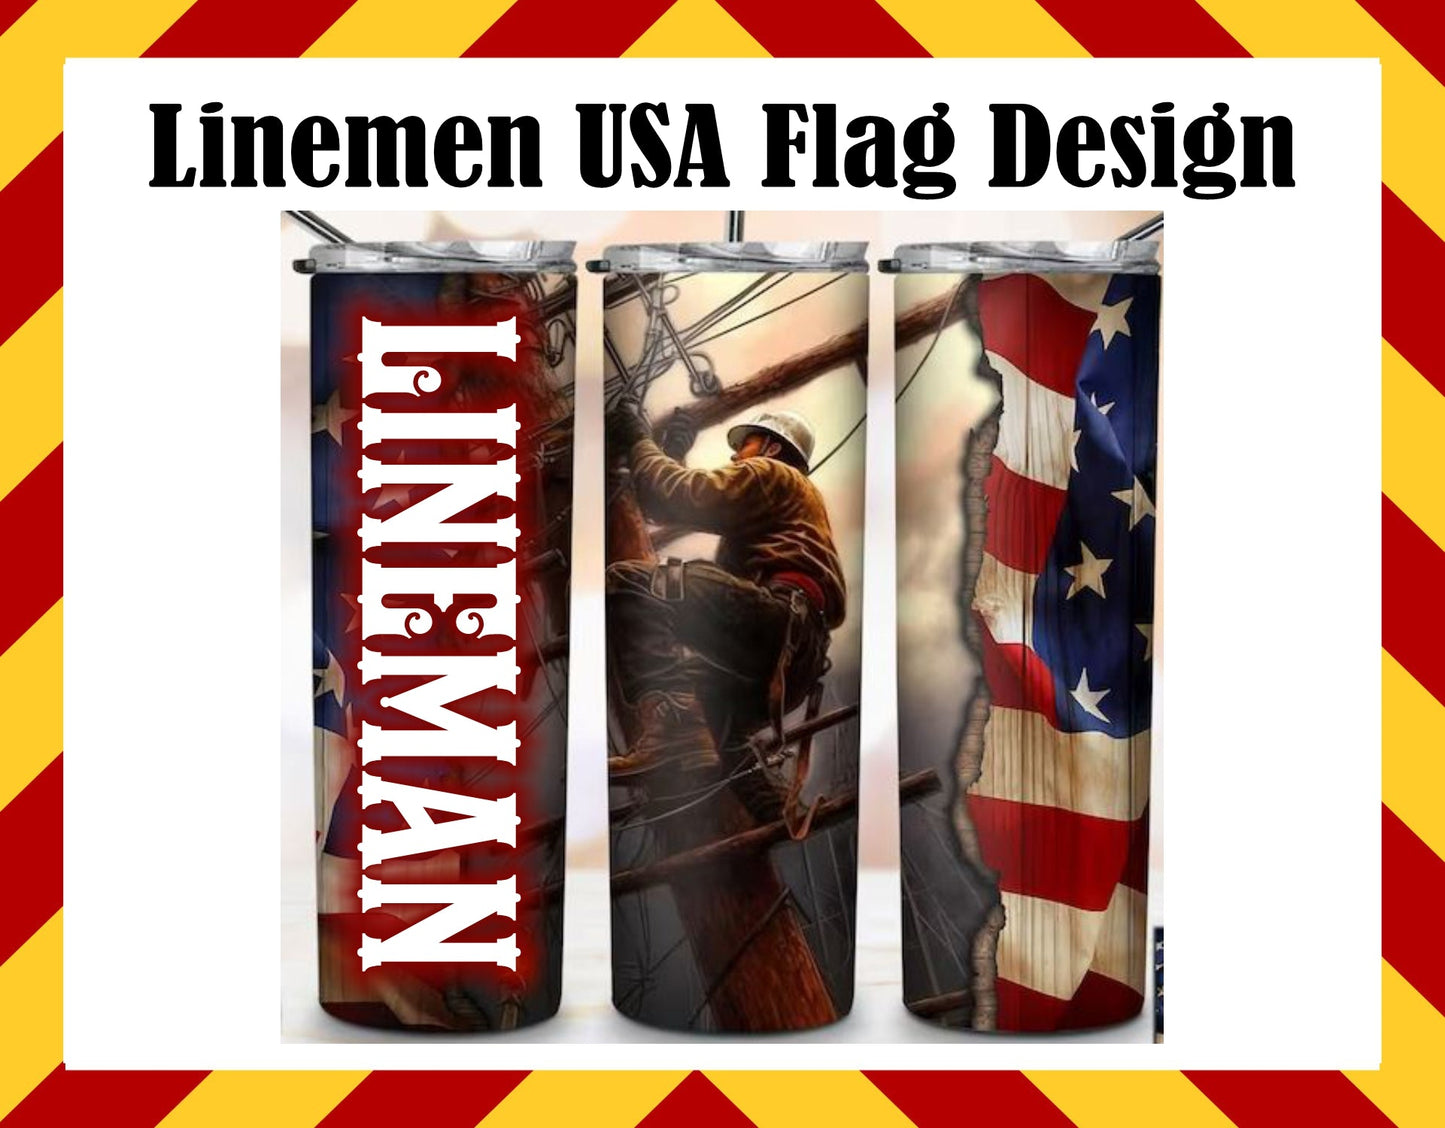 Stainless Steel Cup - Linemen USA Flag Design Hot/Cold Cup